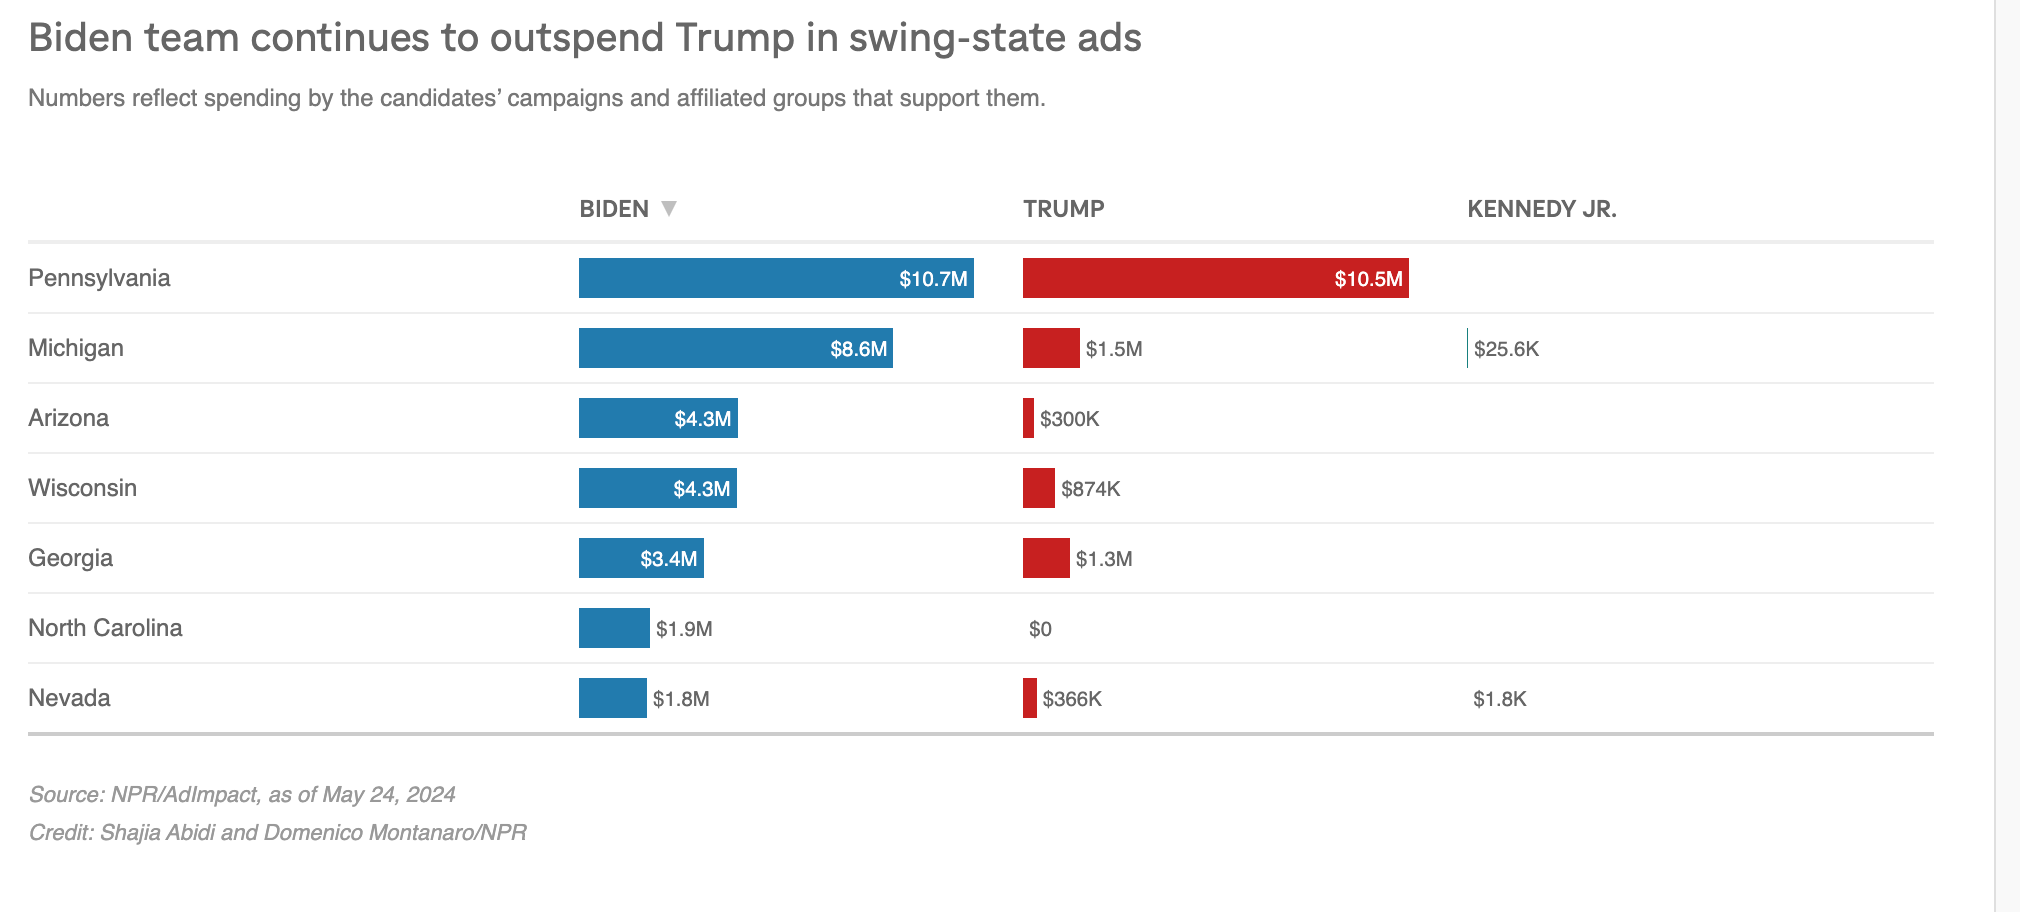 A graph shows spending in swing states by the Biden and Trump campaigns